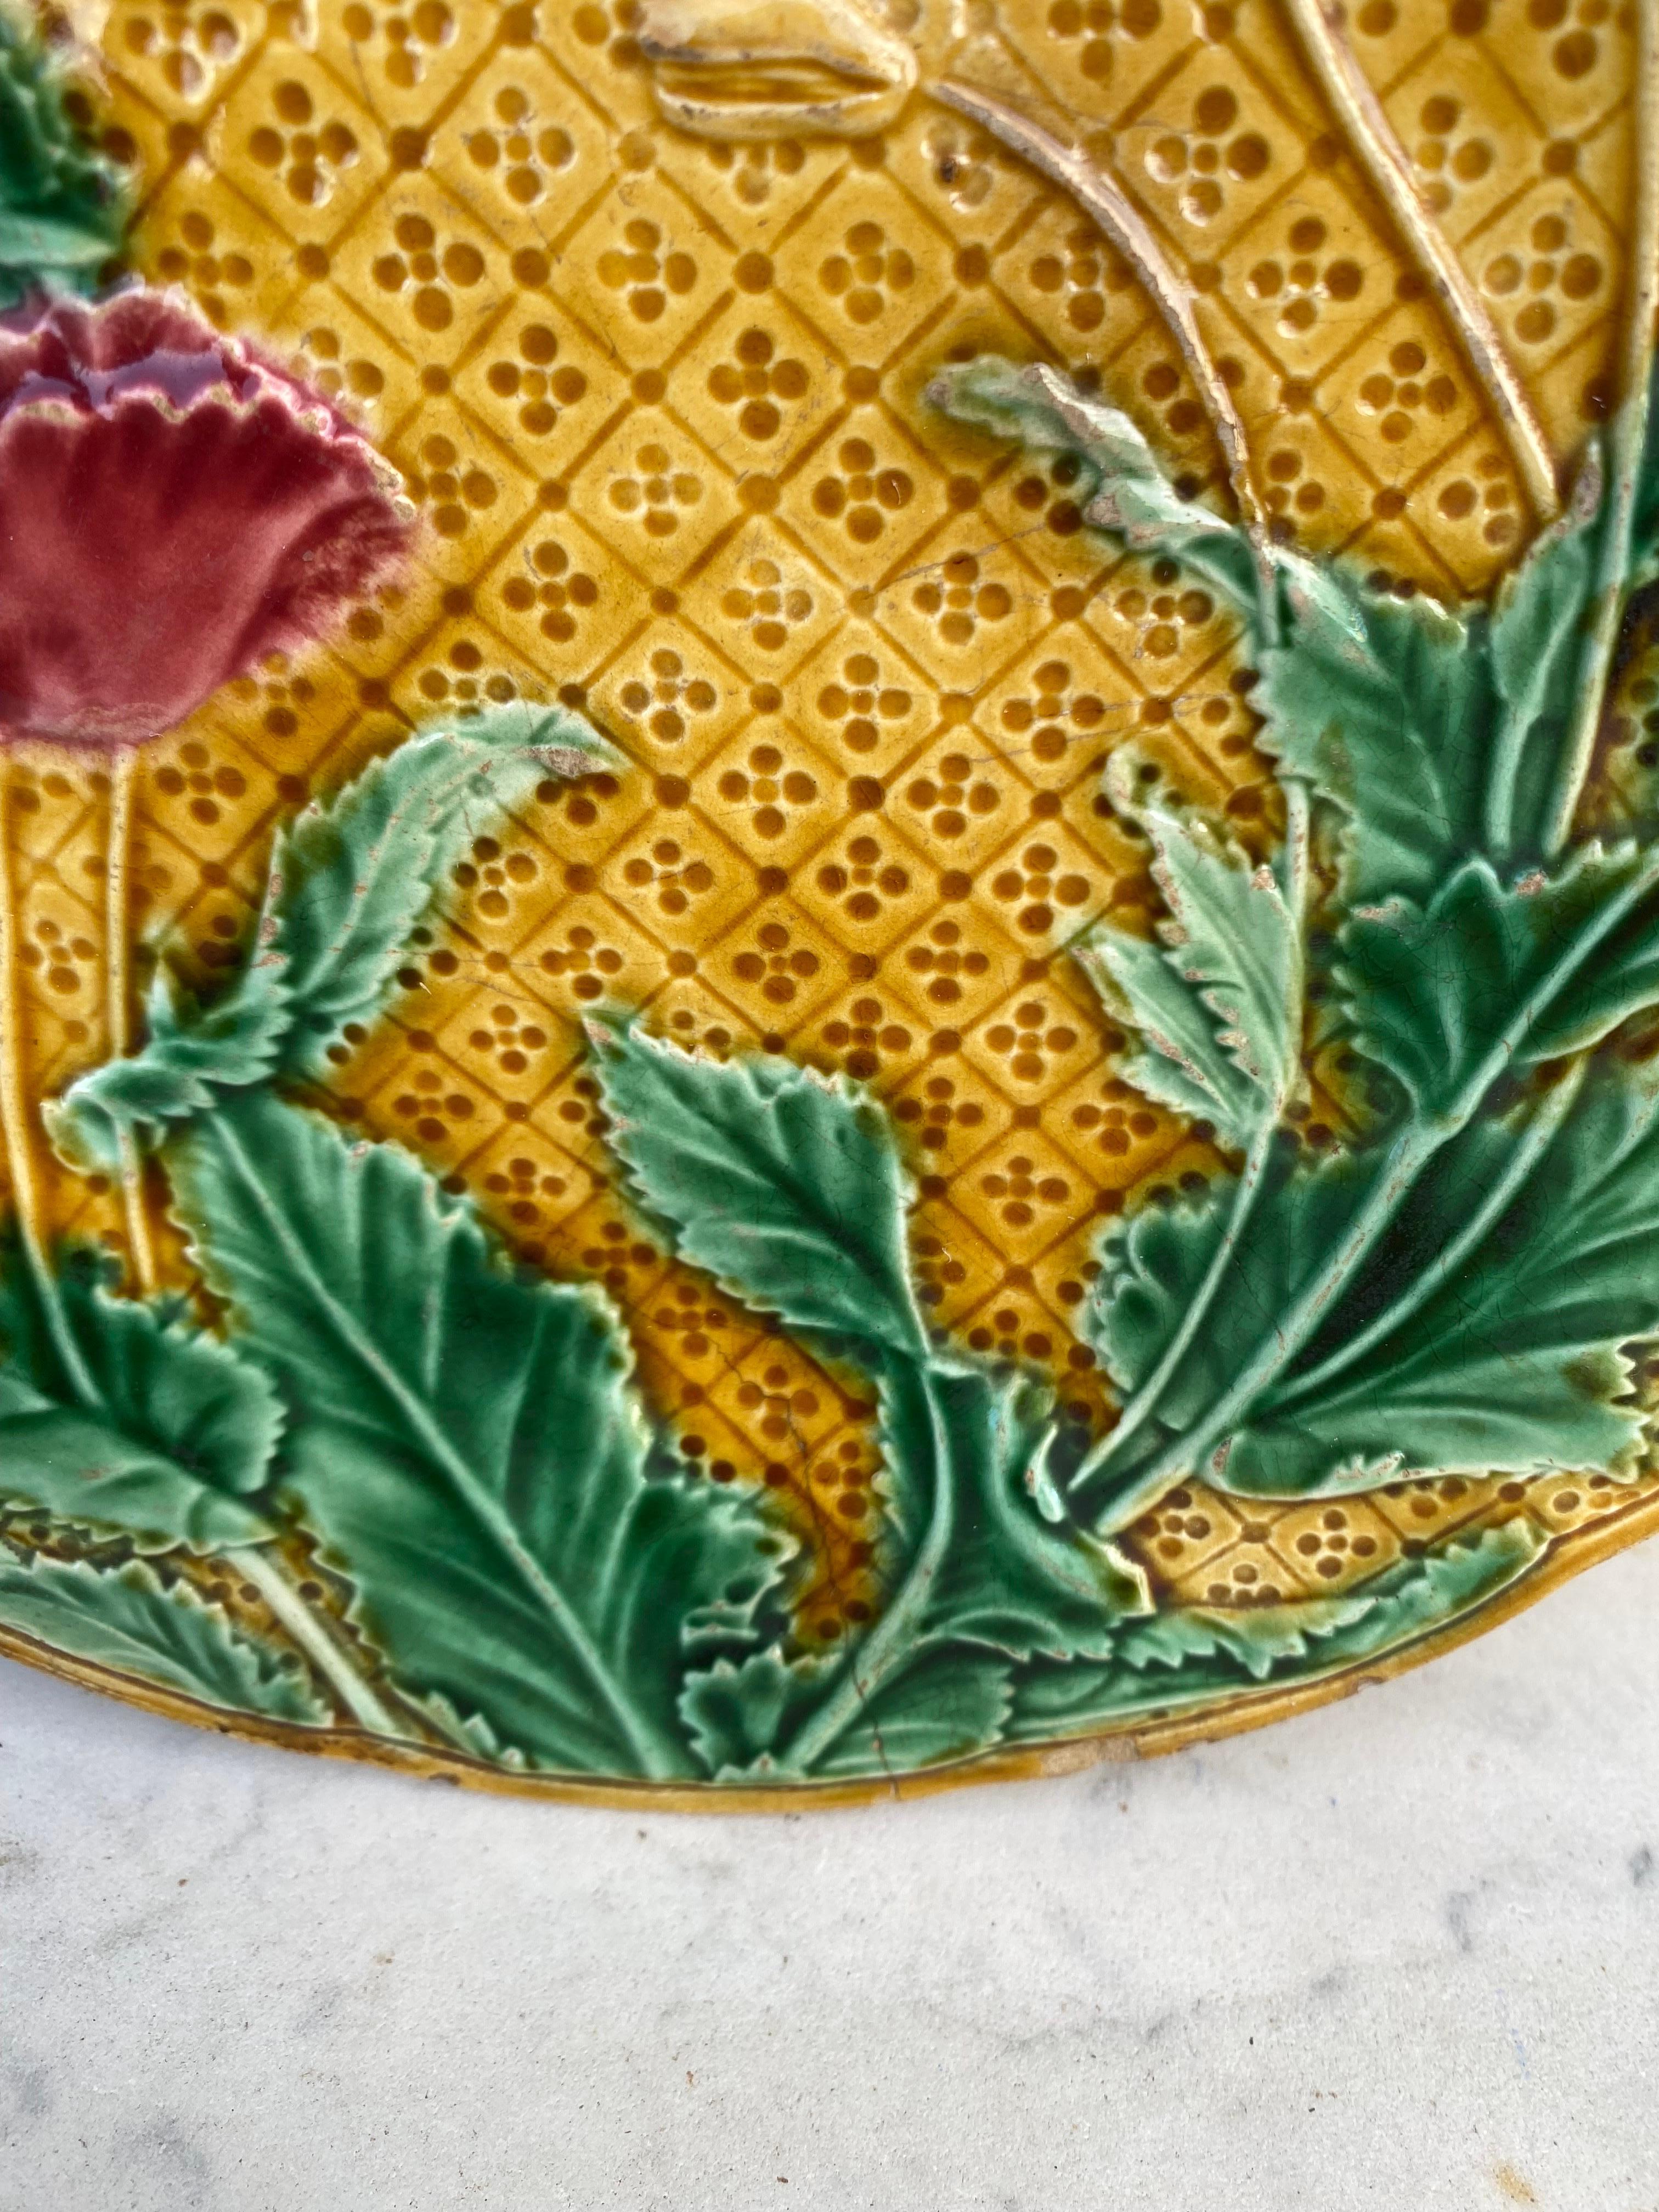 French Majolica Poppies and butterfly plate Gien, circa 1880.
Very rare color.
This plate have an original default hairline made during the production.